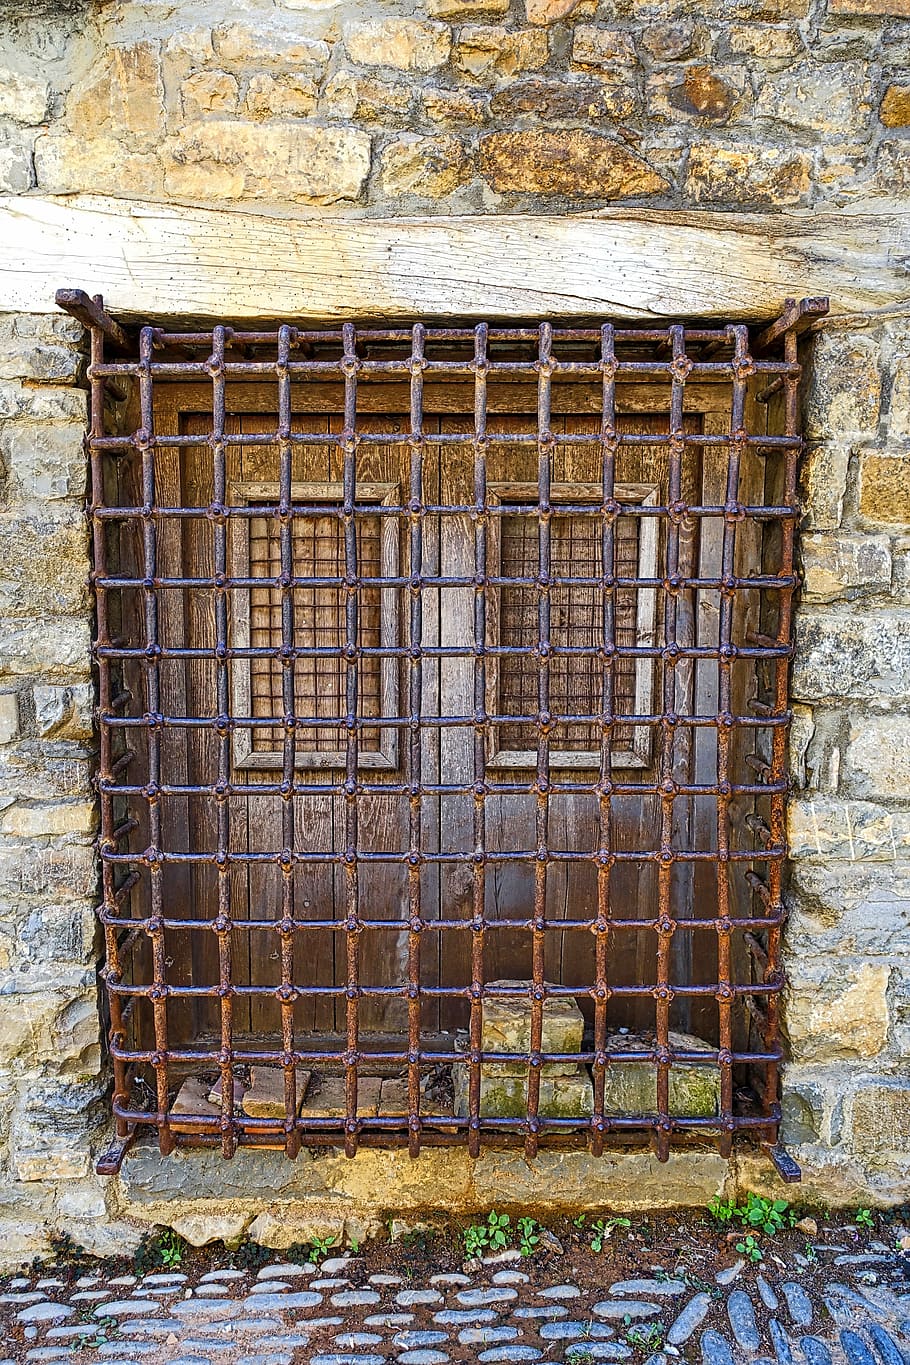 Bars, Window, Ironwork, exterior, defence, protection, brick wall, architecture, built structure, cage